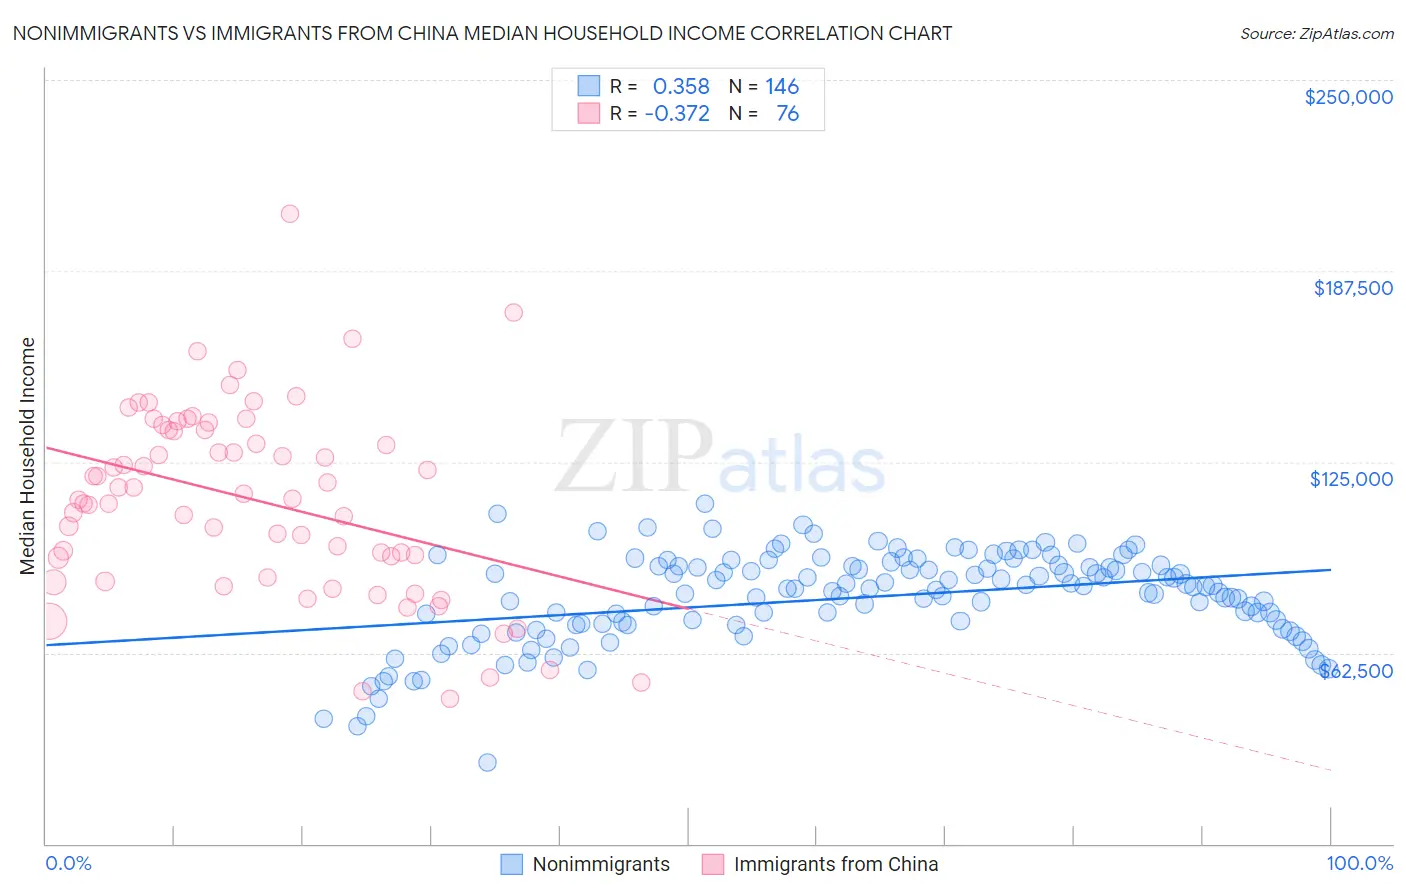 Nonimmigrants vs Immigrants from China Median Household Income